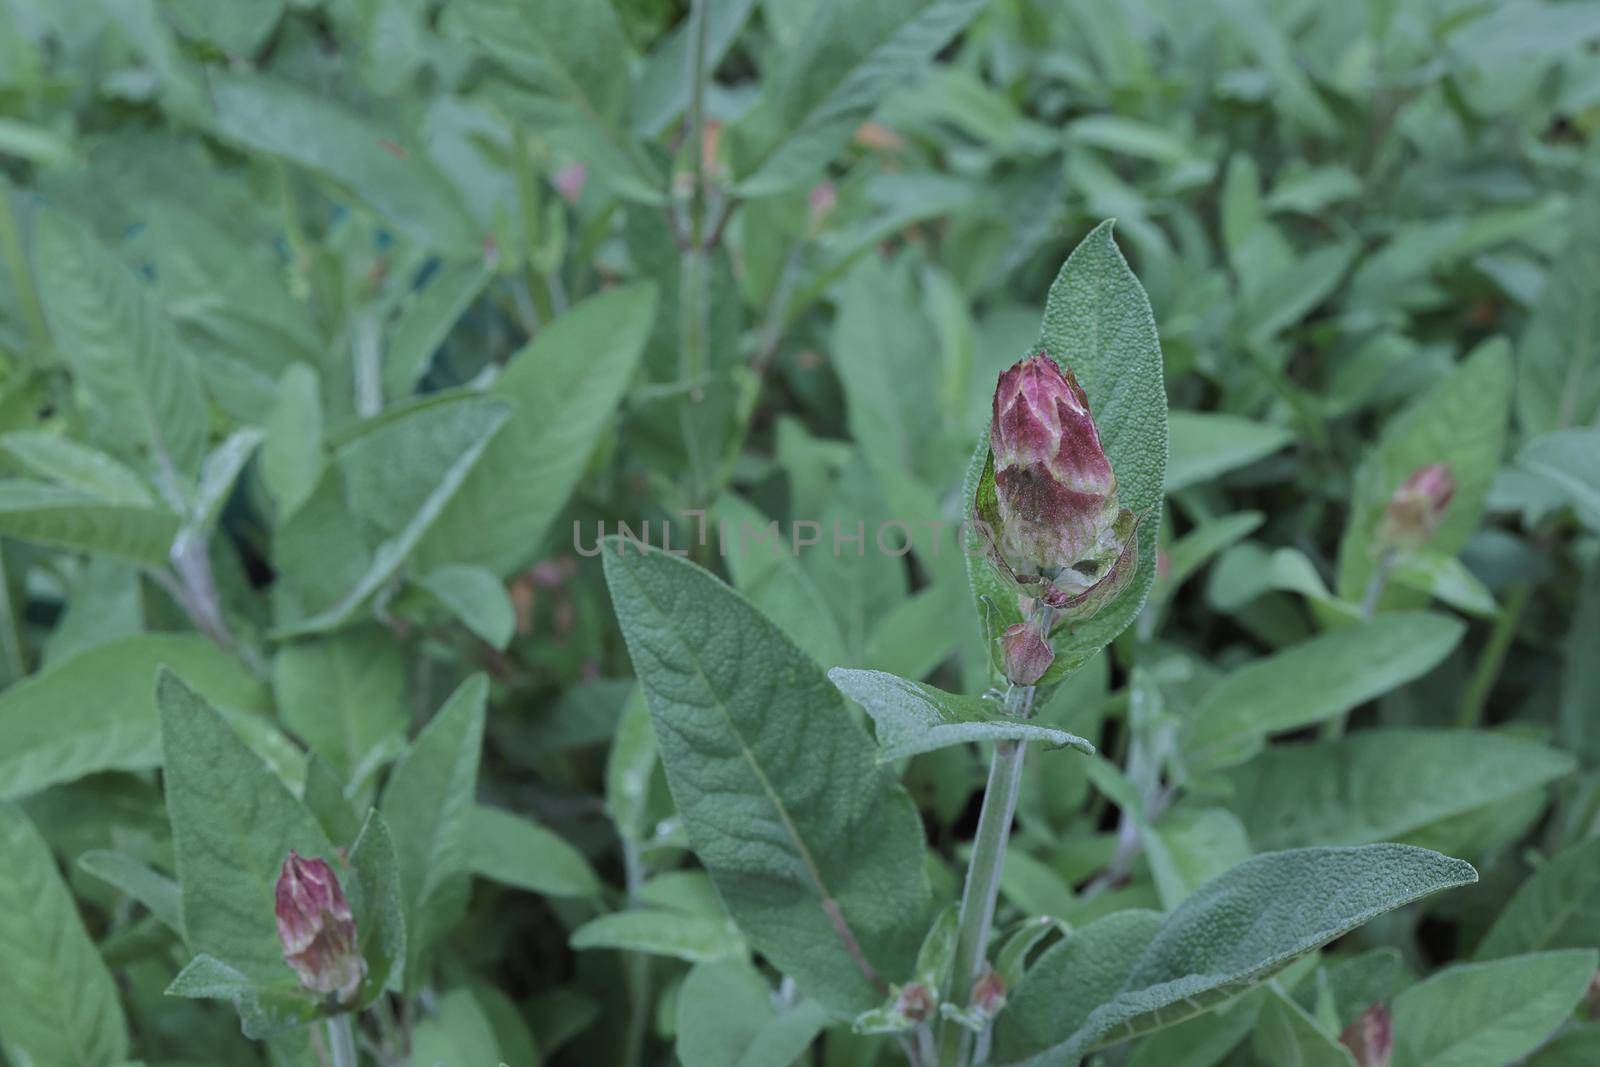 Salvia sclarea bud and leaves. Aromatic Sage young sprout in bloom with purple and violet little flowers growing in herb garden. Salvia viridis bud, medicinal herb by Proxima13